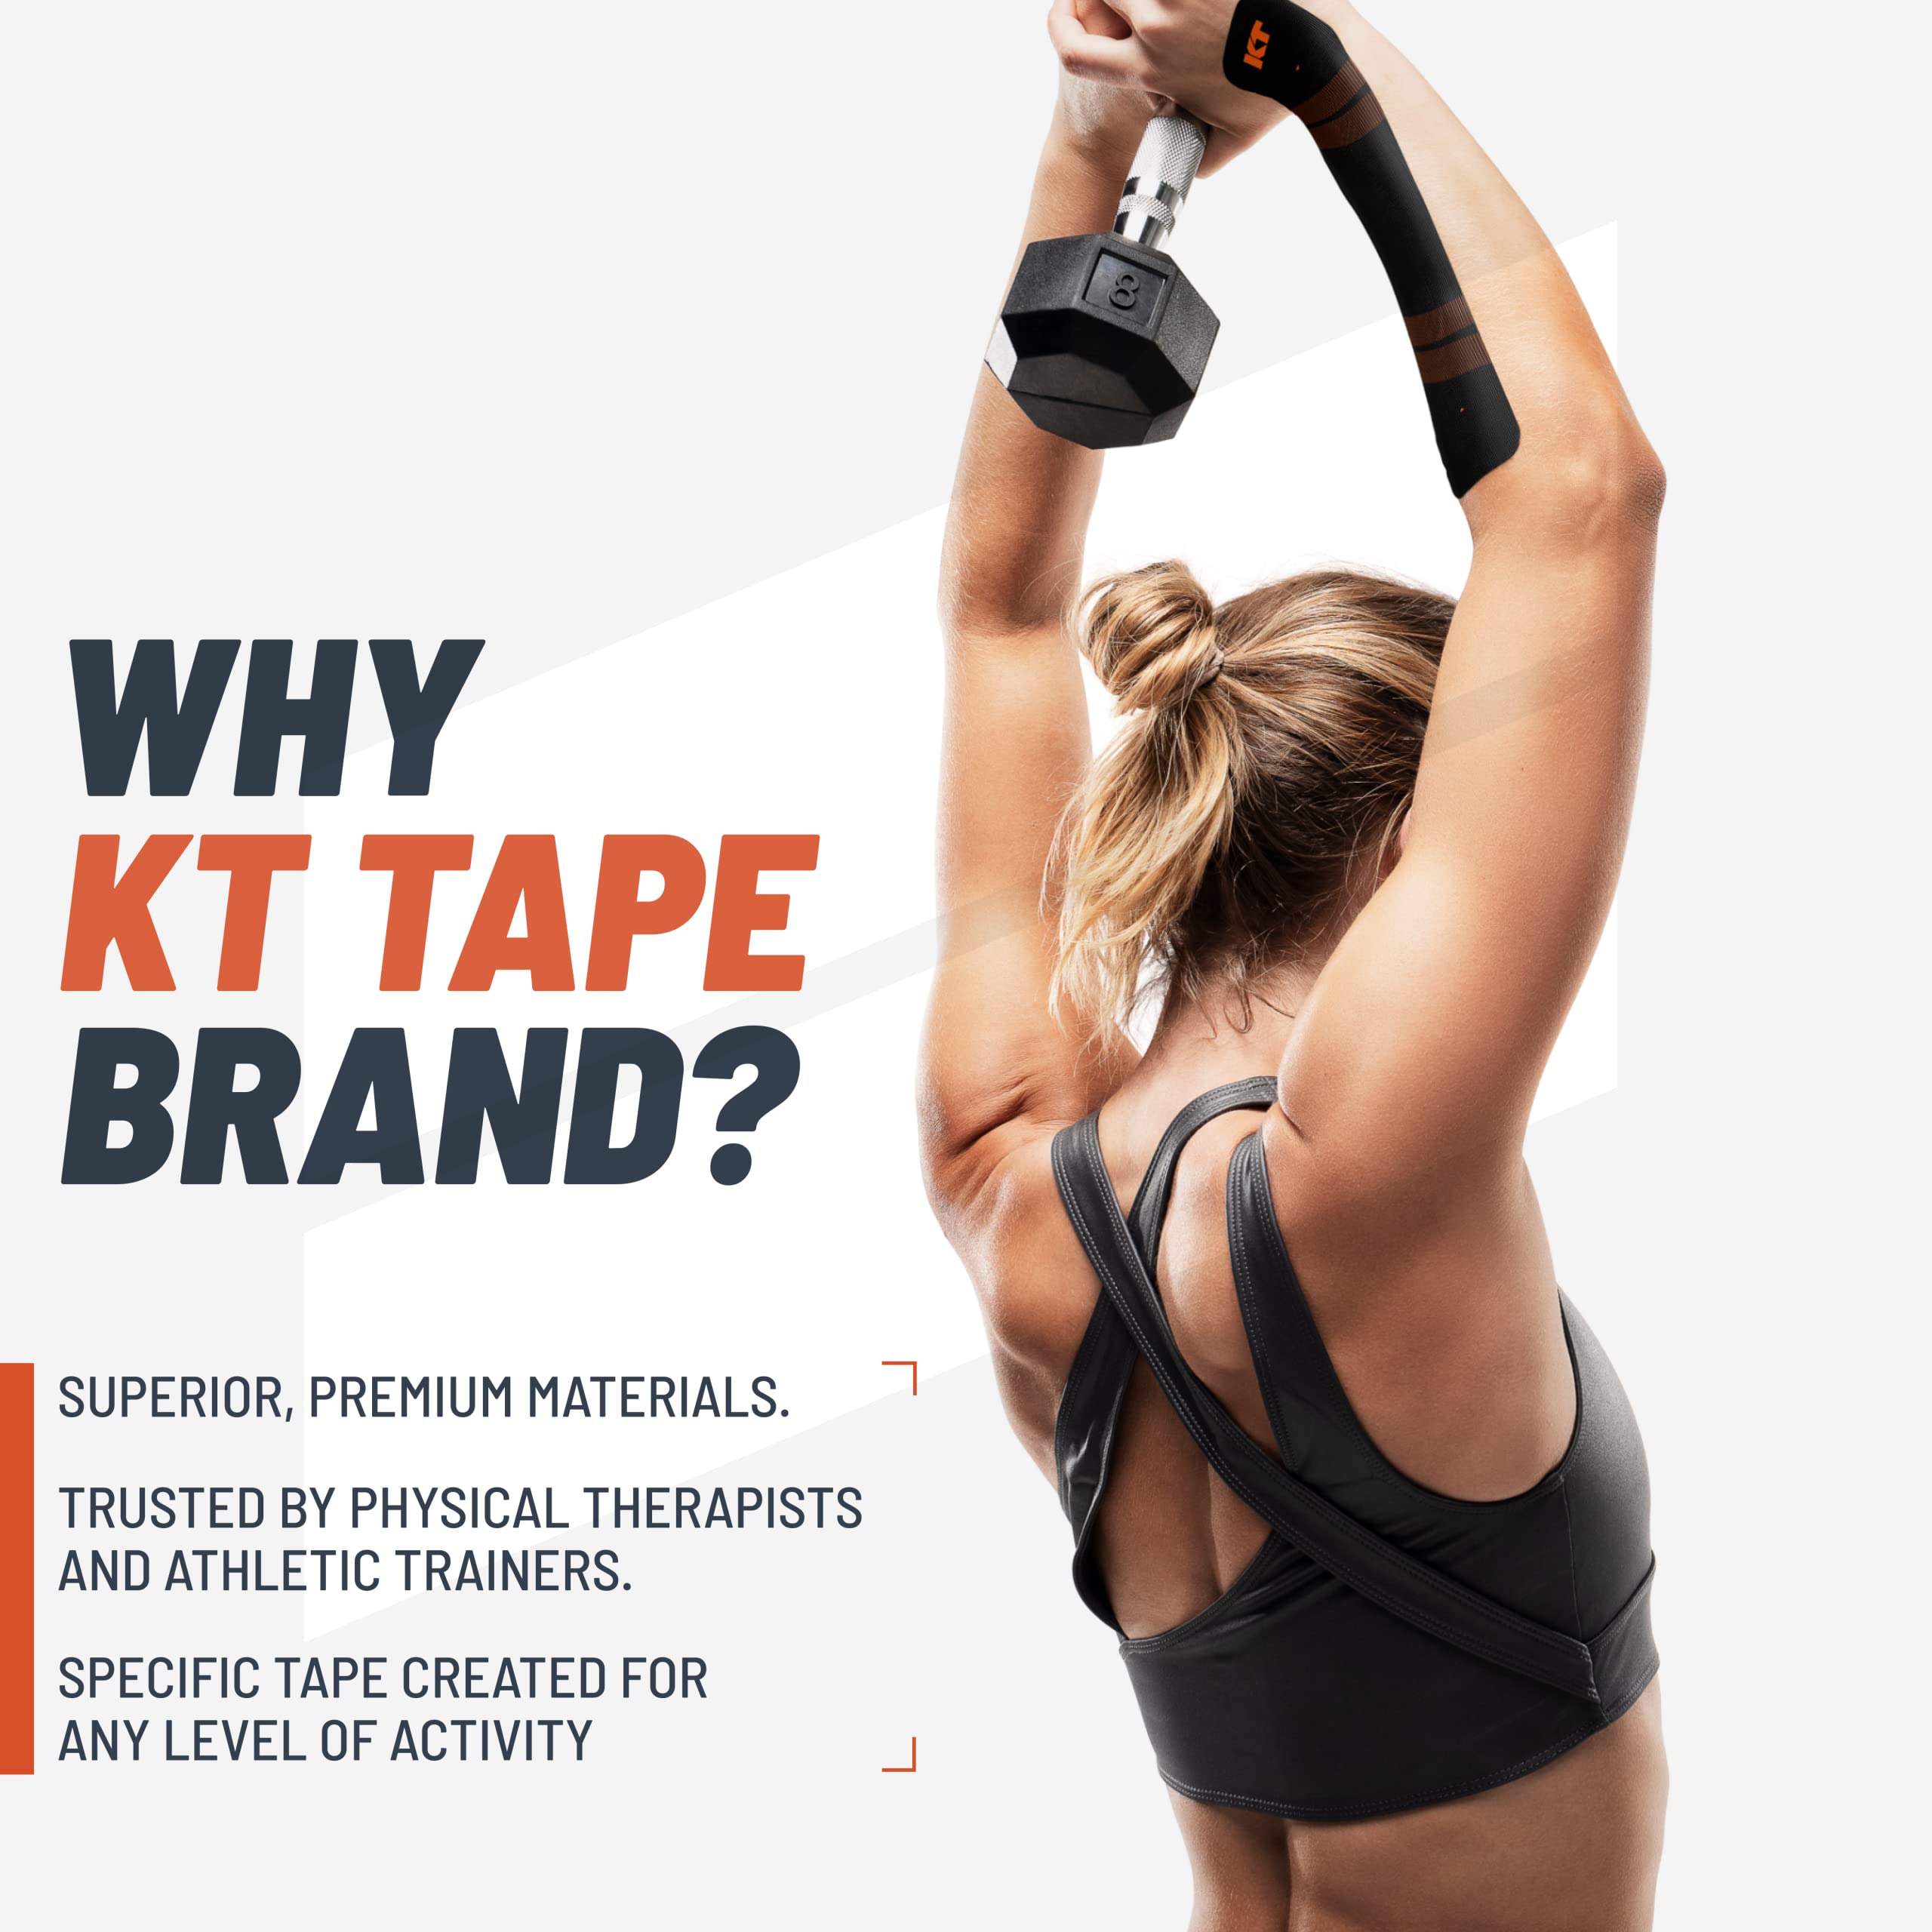 KT Tape, PRO Synthetic Kinesiology Athletic Tape, 20 Count, 10” Precut Strips, 20 Precut Strips